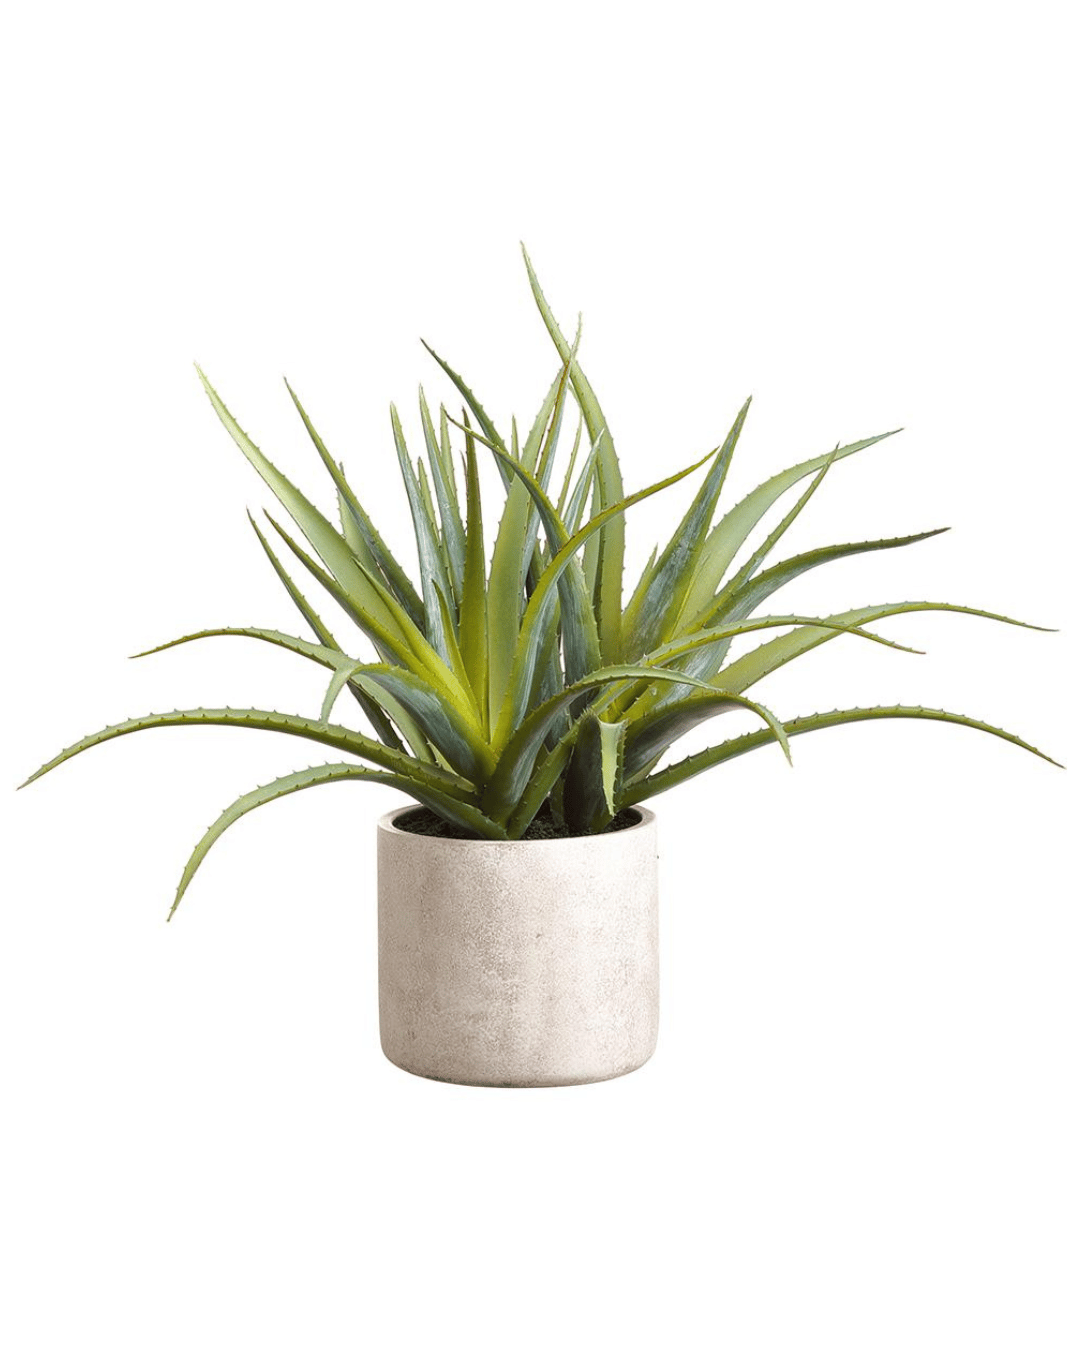 A 21&quot; AllState Floral And Craft Aloe Plant in Cement Pot with spiked, green leaves in a round, gray stone pot isolated on a white background in Scottsdale, Arizona.